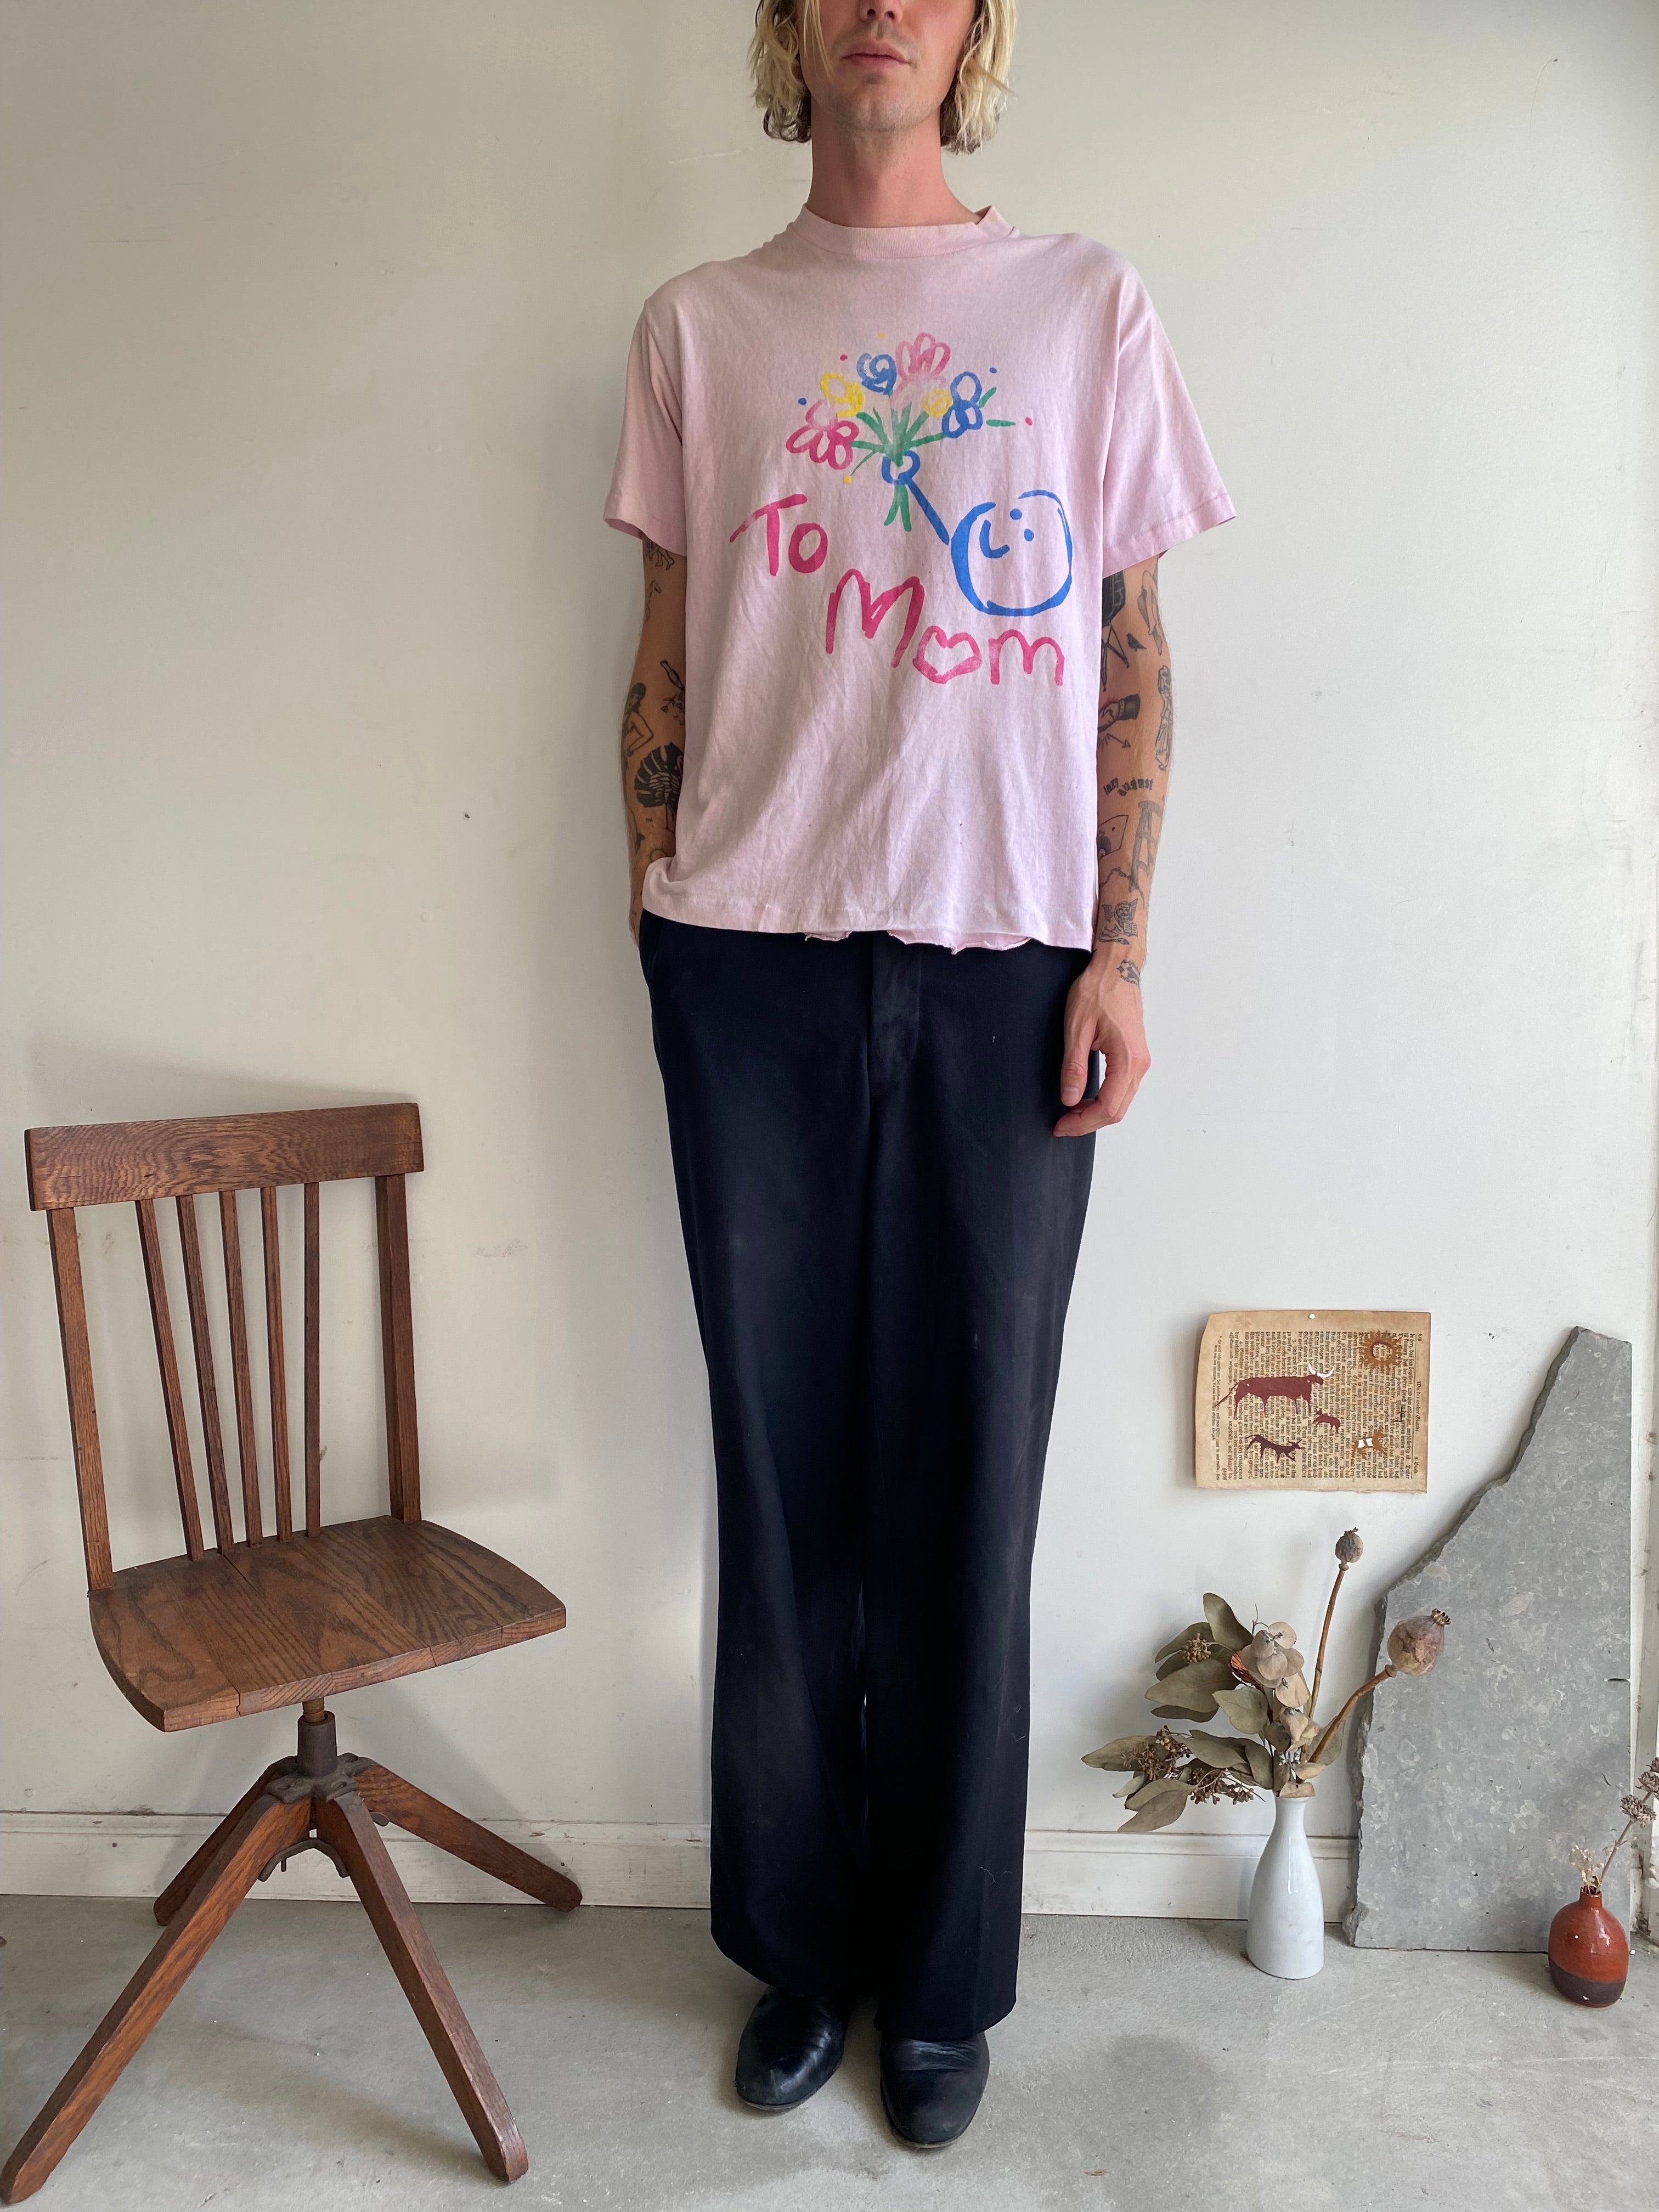 1990s "To Mom" T-Shirt (M)